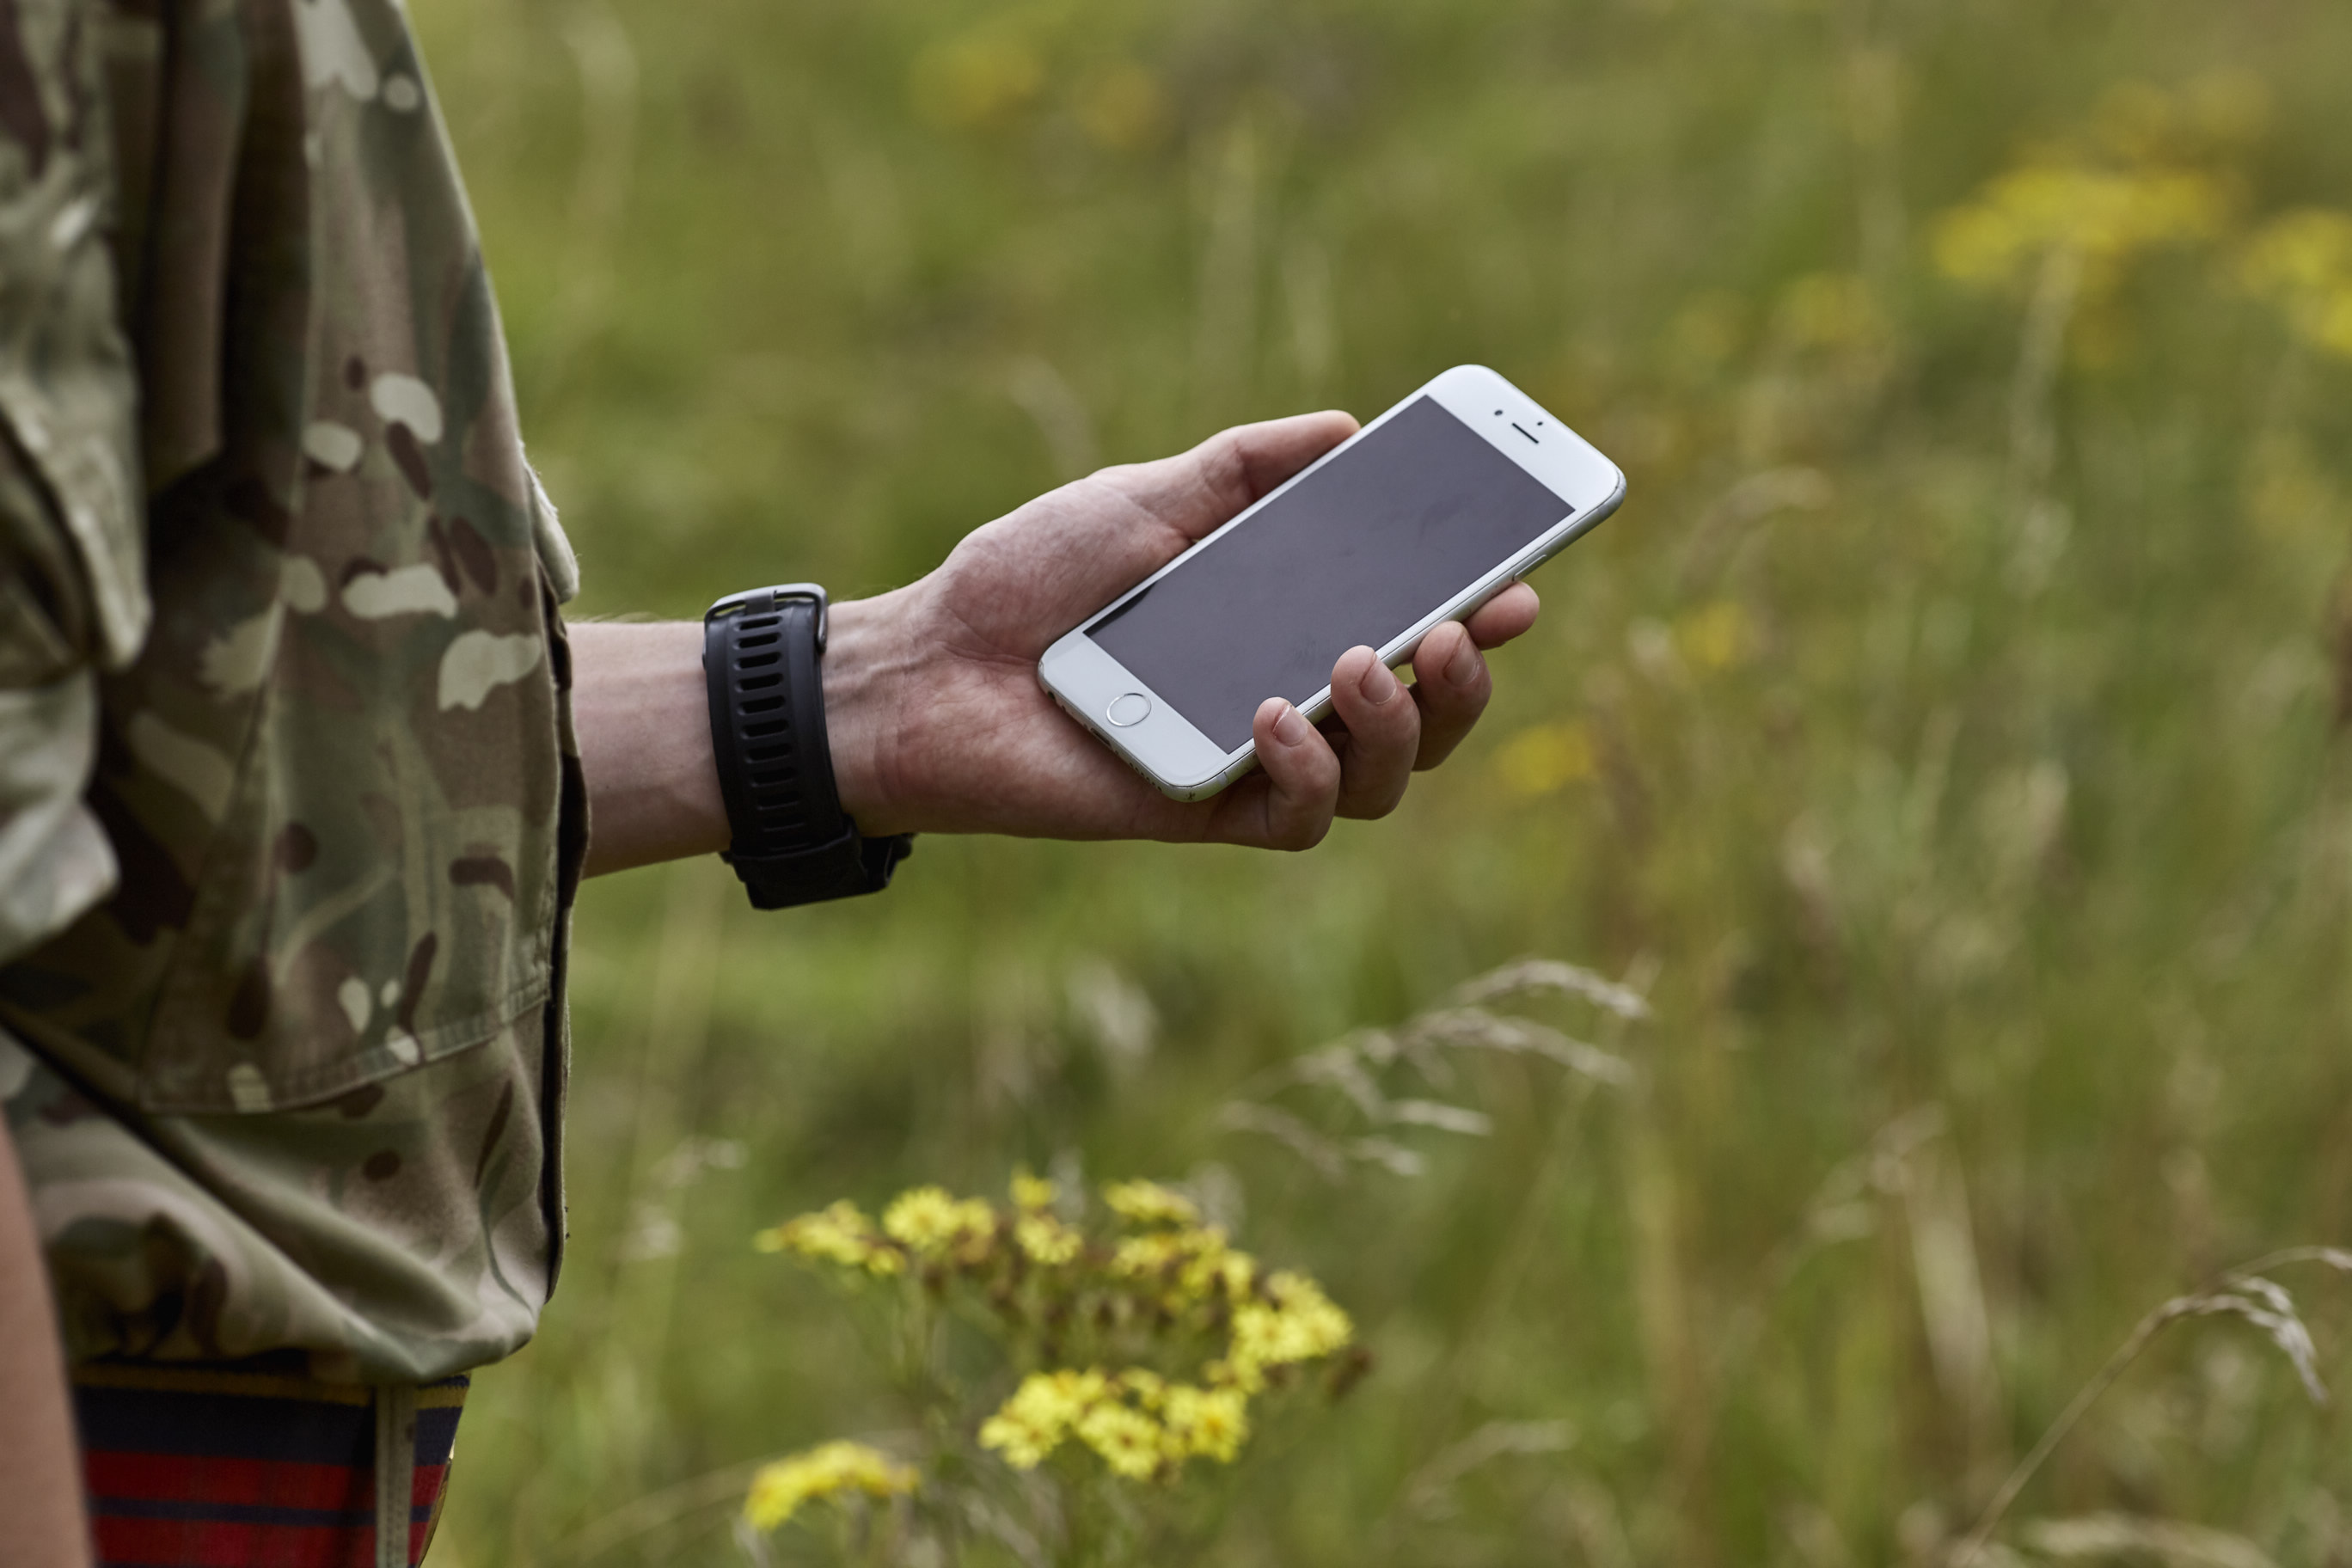 Iphone in hand in field